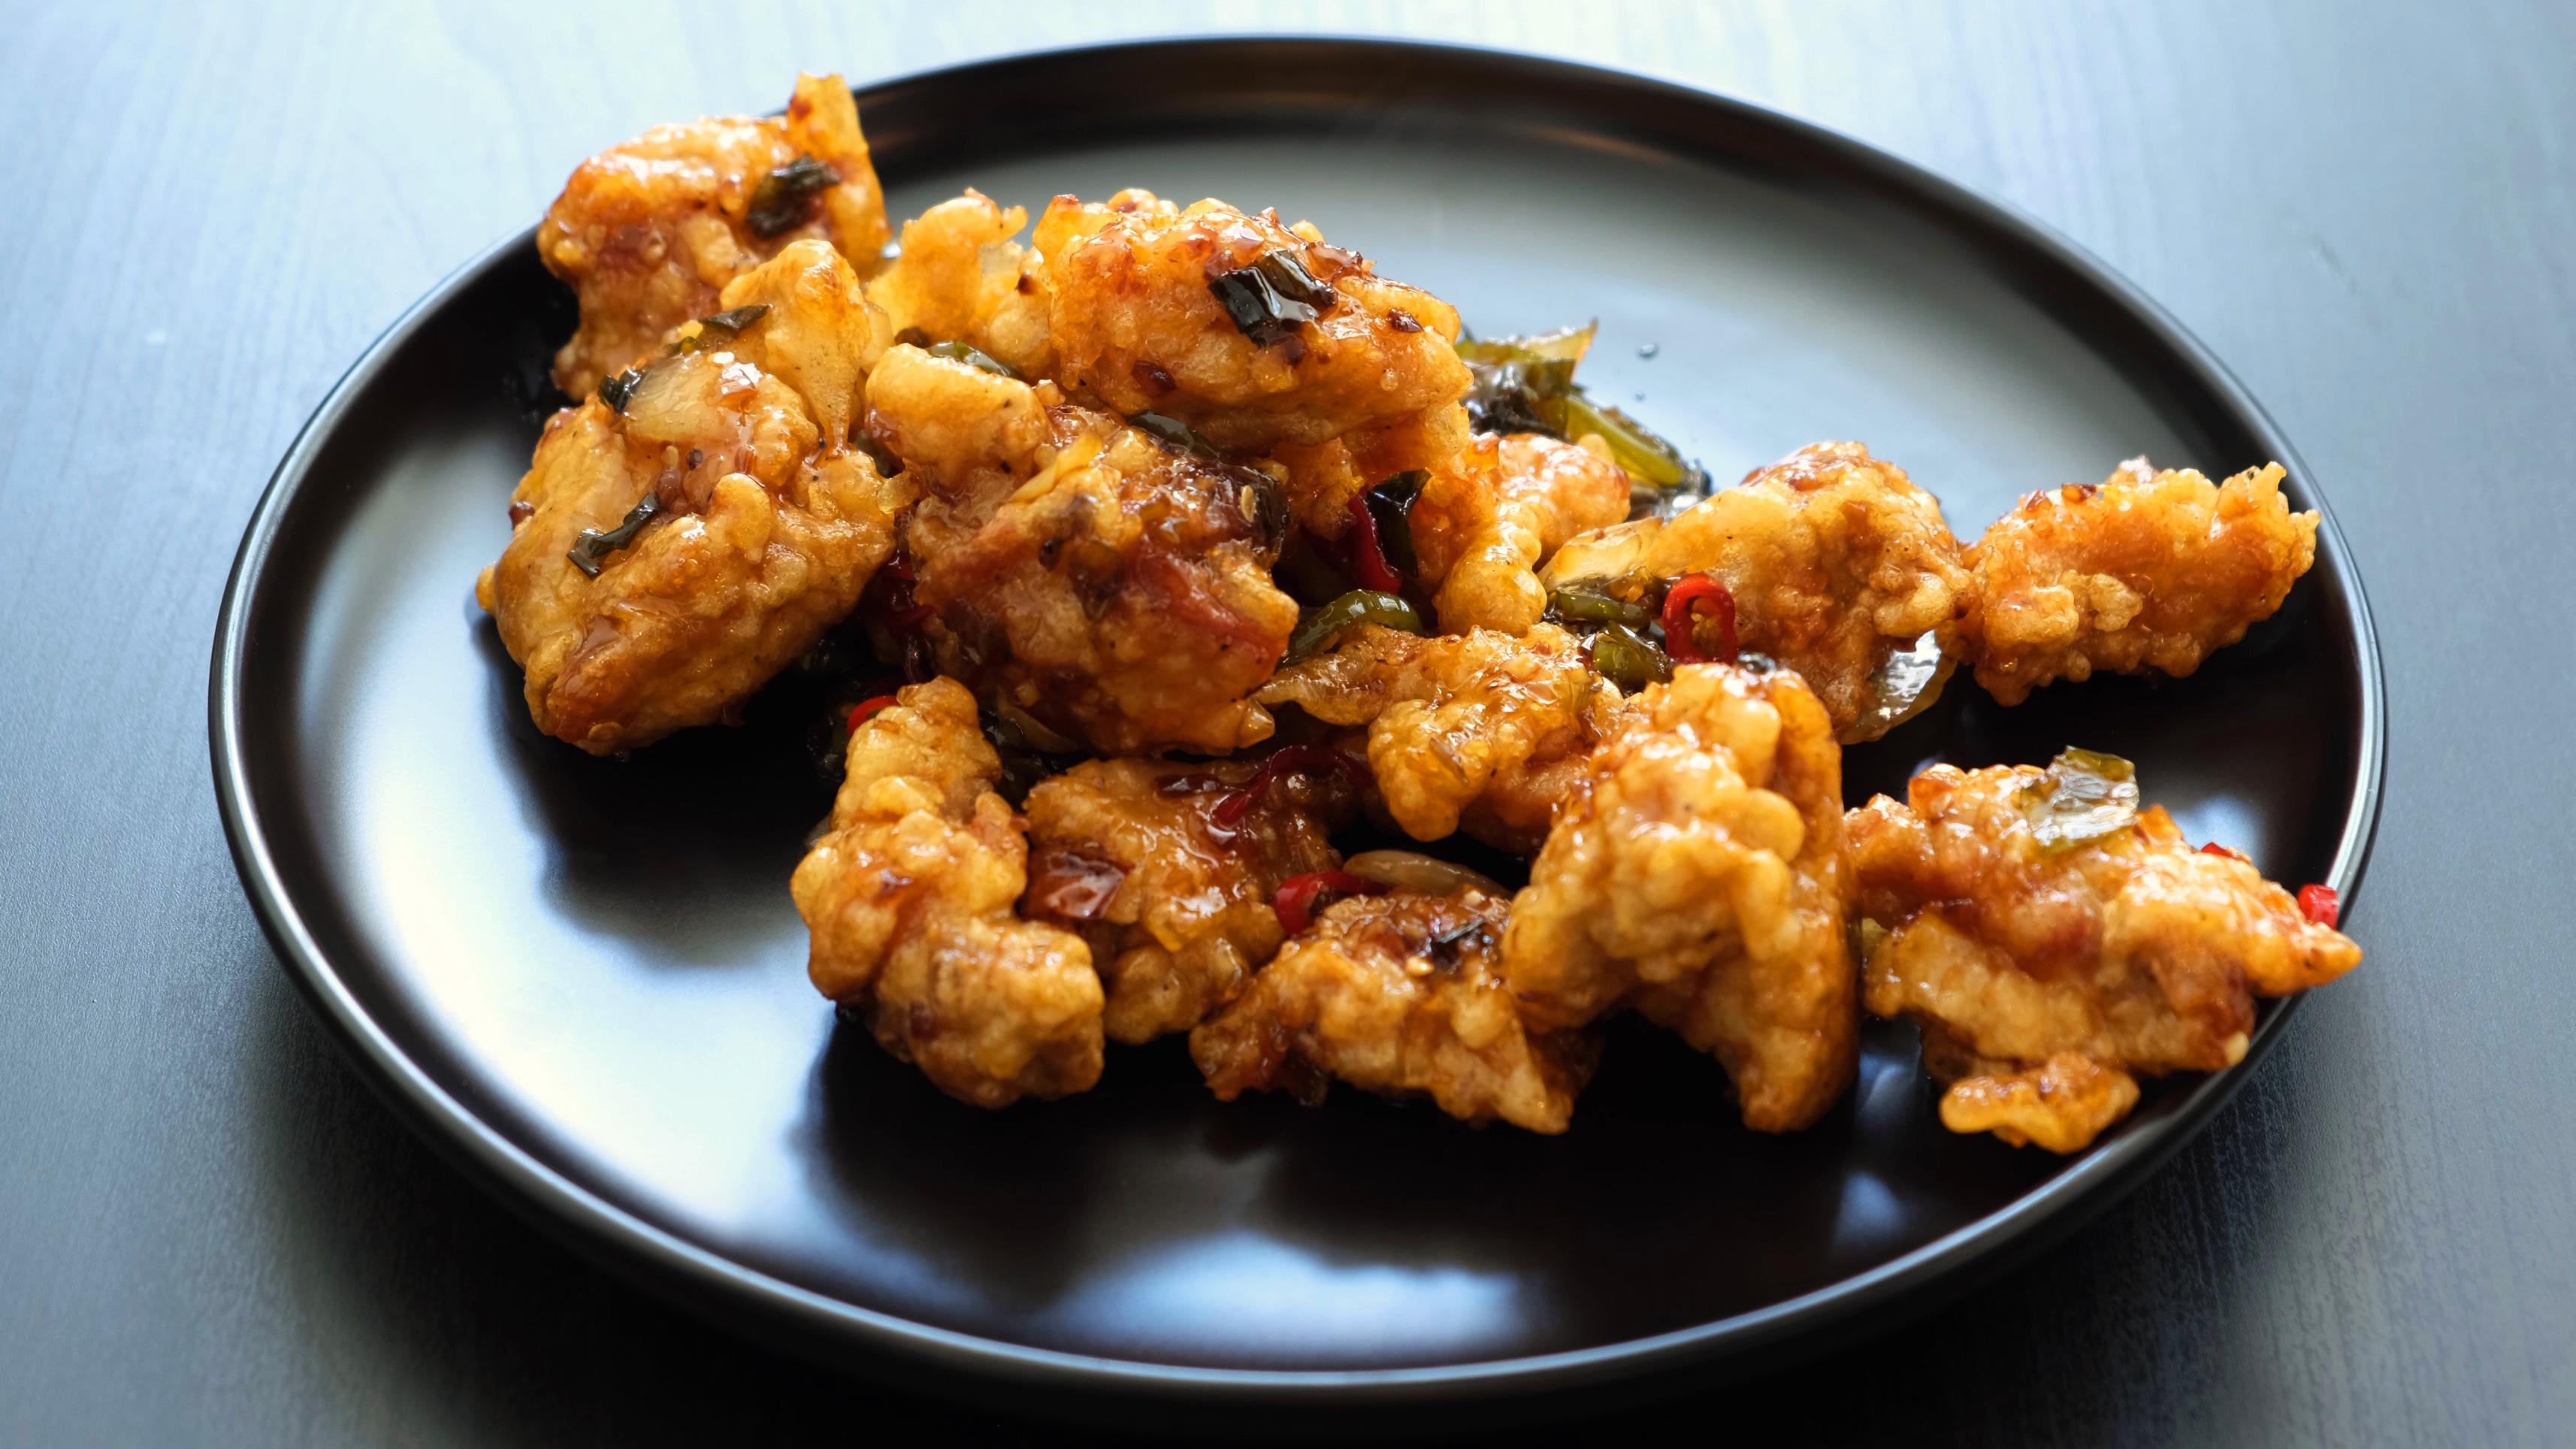 Spicy Garlic Fried Chicken Kkanpunggi Dining And Cooking